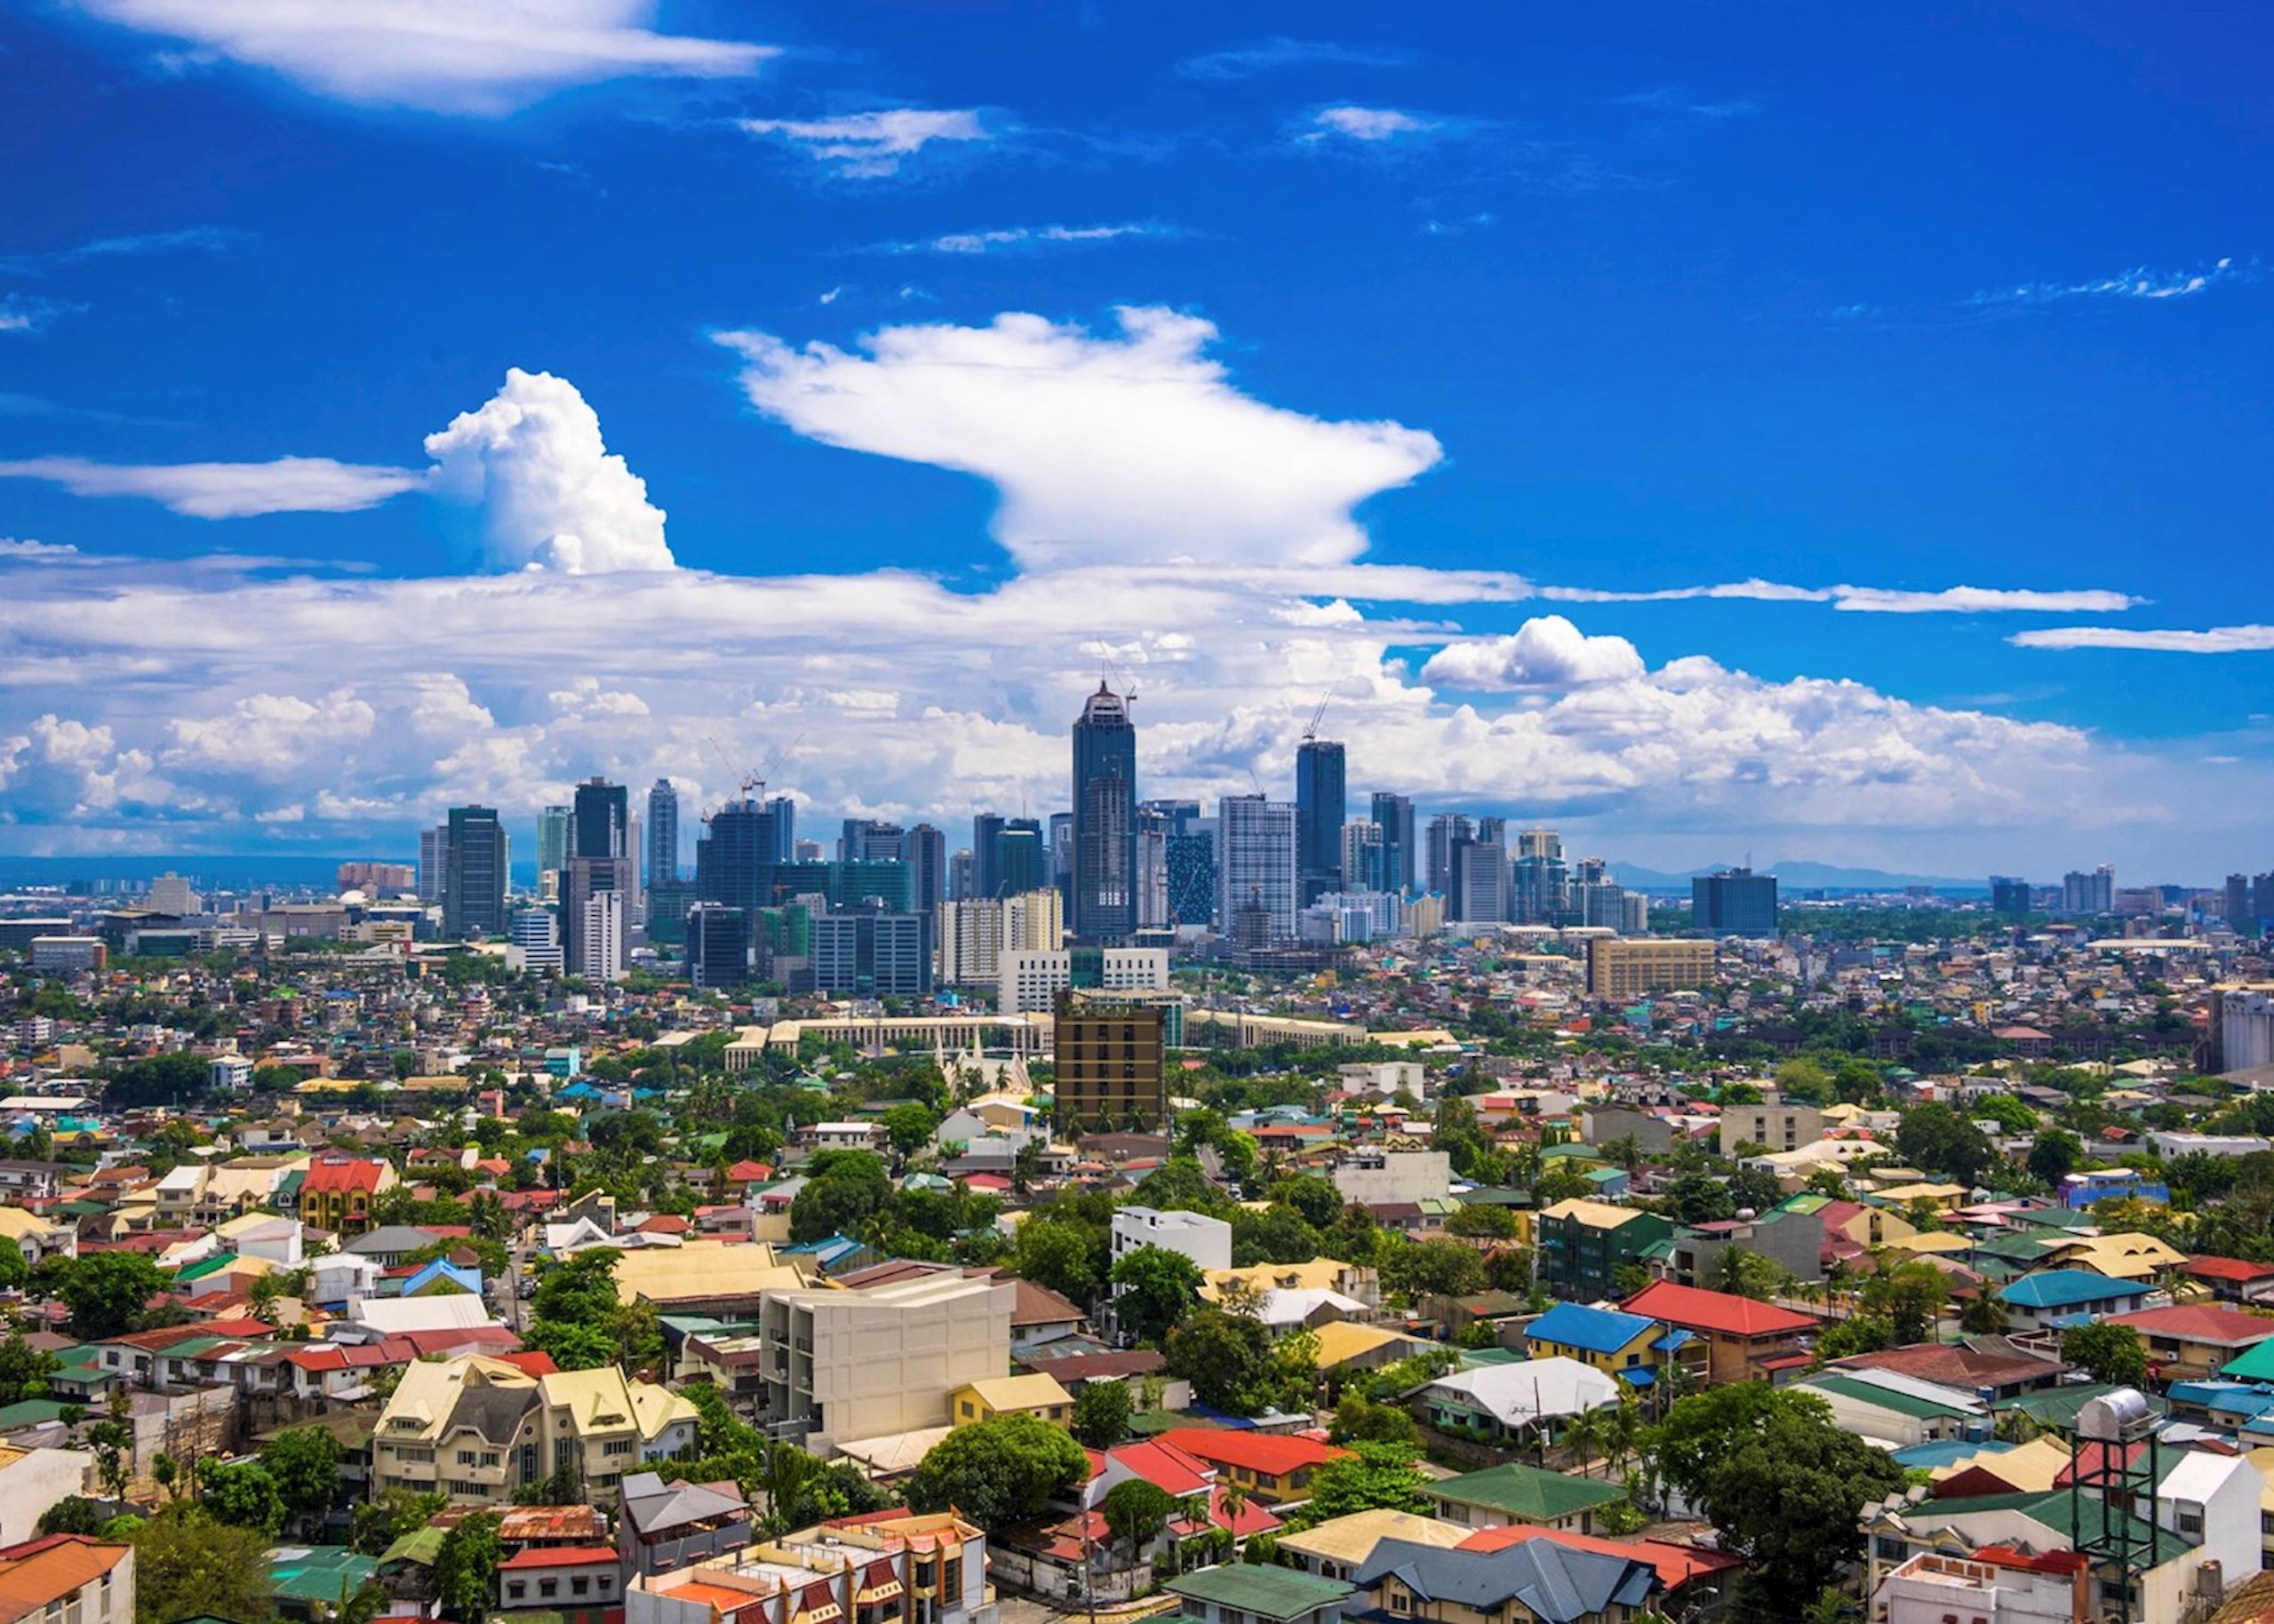 Visit Manila on a trip to The Philippines | Audley Travel